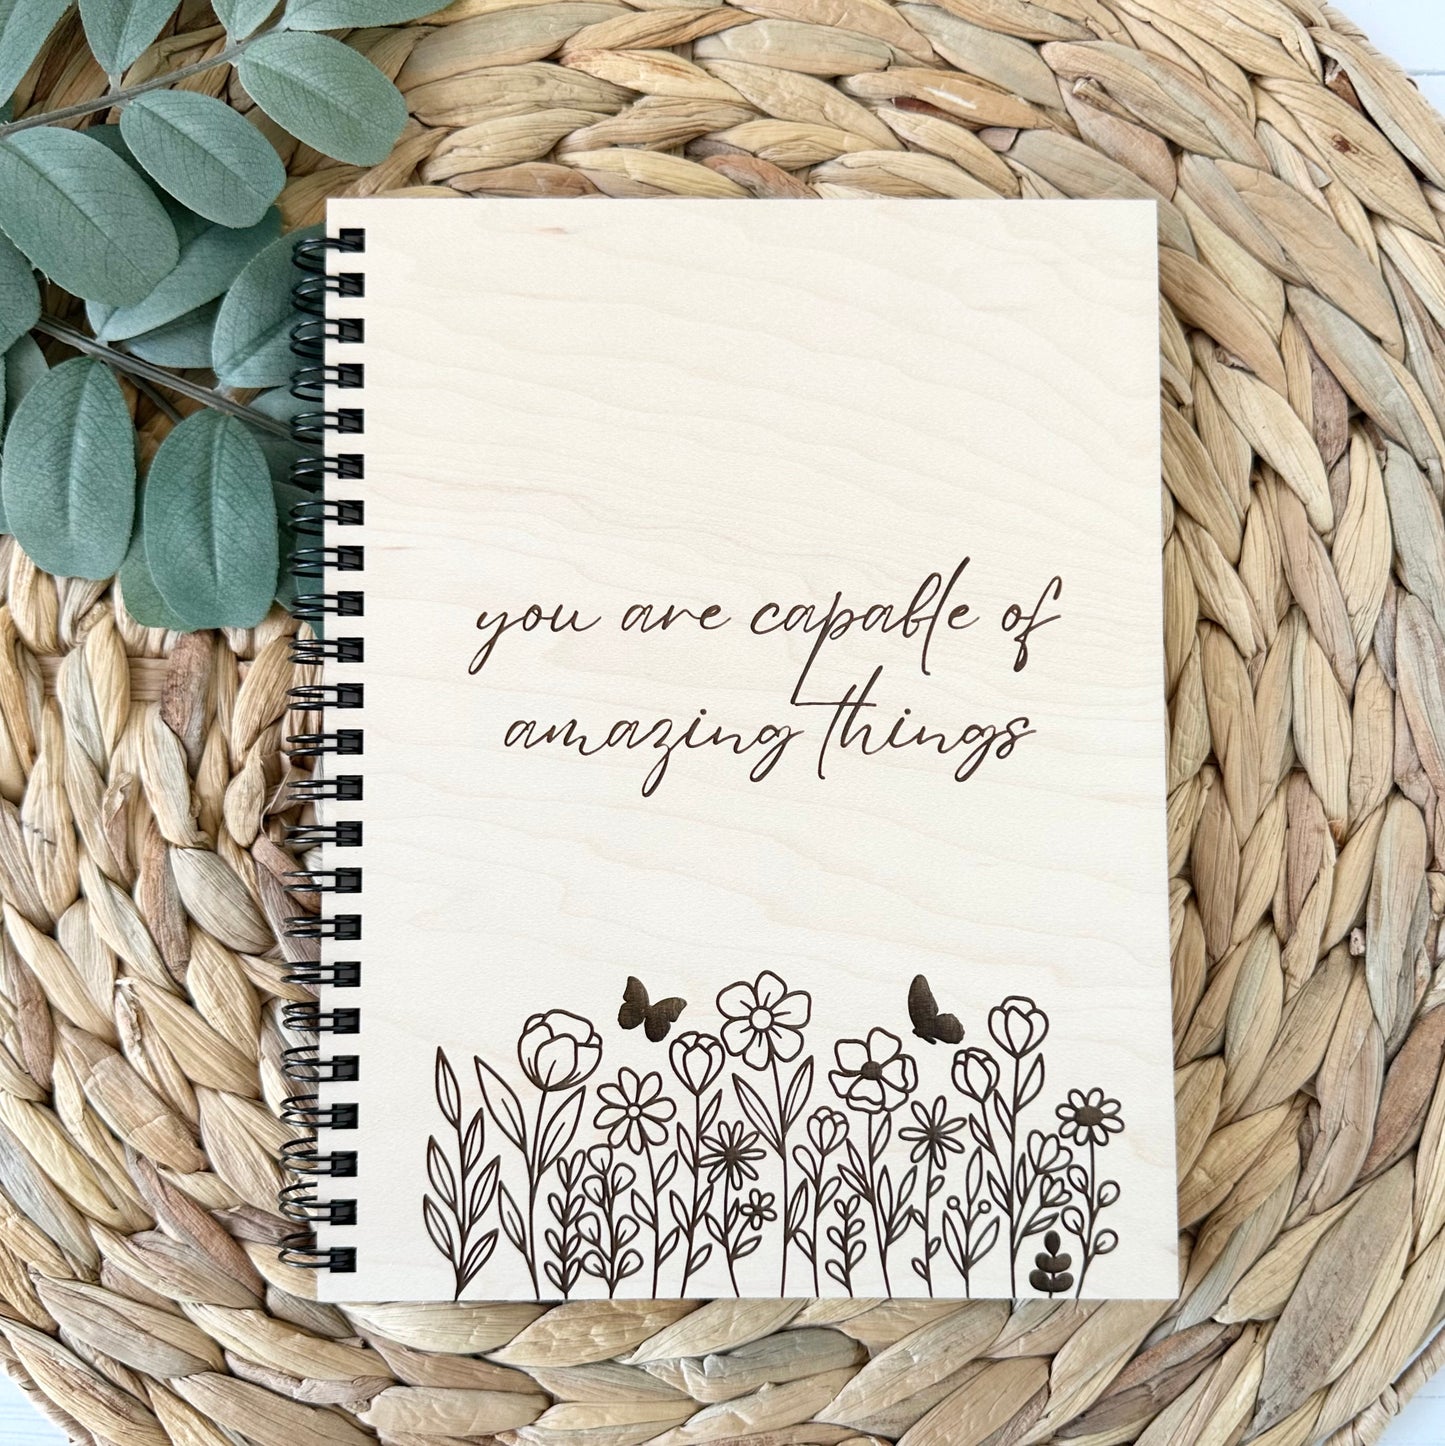 Engraved wood journal - you are capable of amazing things